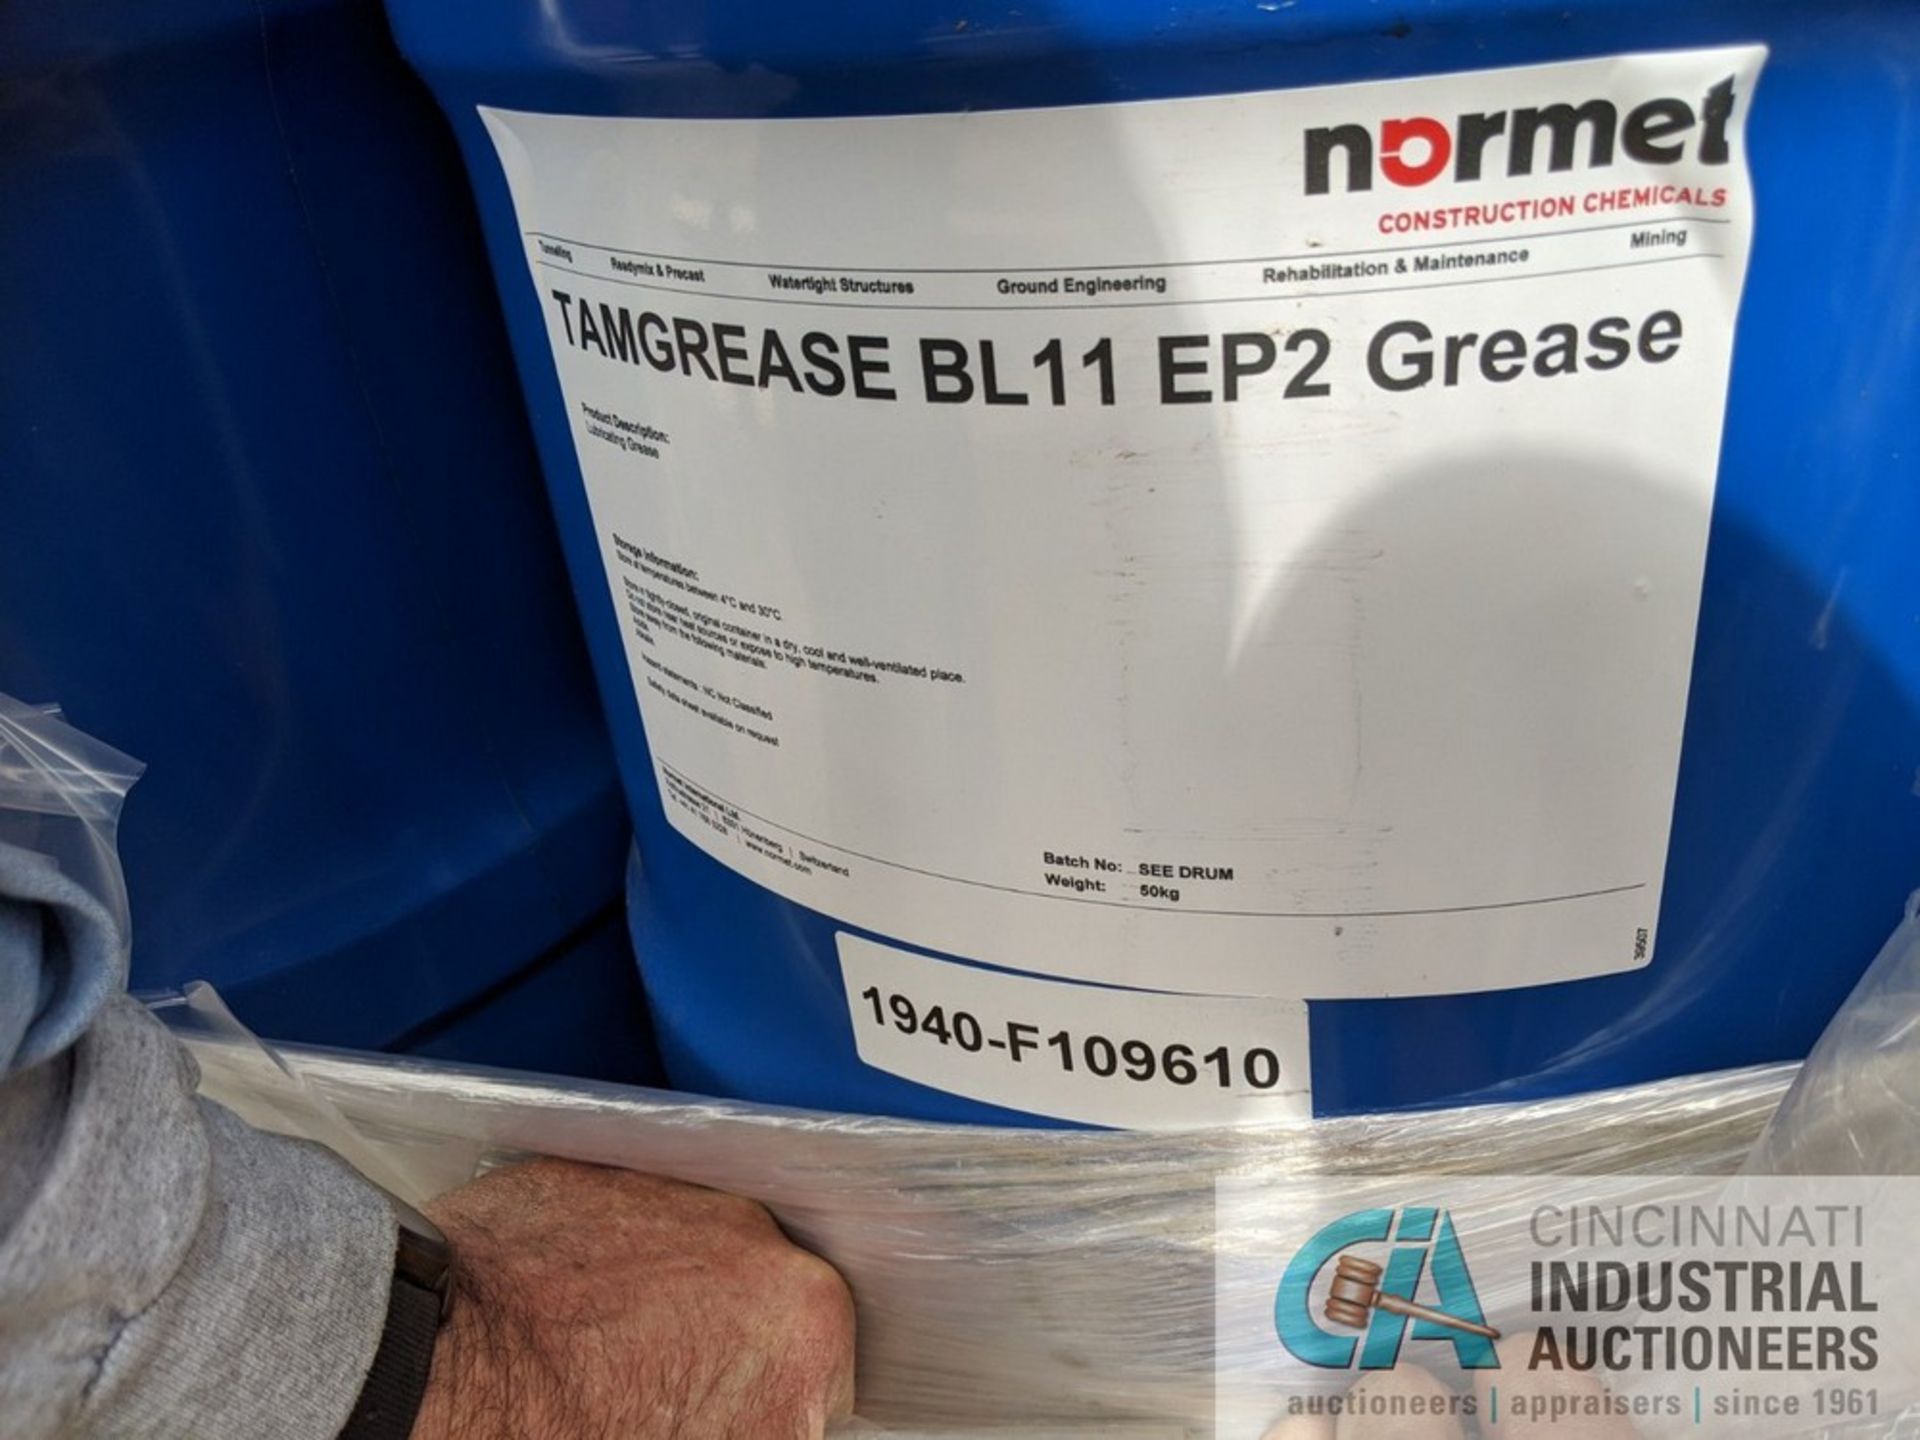 50 KG DRUMS OF VIRGIN TAMGREASE BL11 EP2 GREASE **LOCATED AT 128 STEUBENVILLE AVE., CAMBRIDGE, - Image 2 of 2